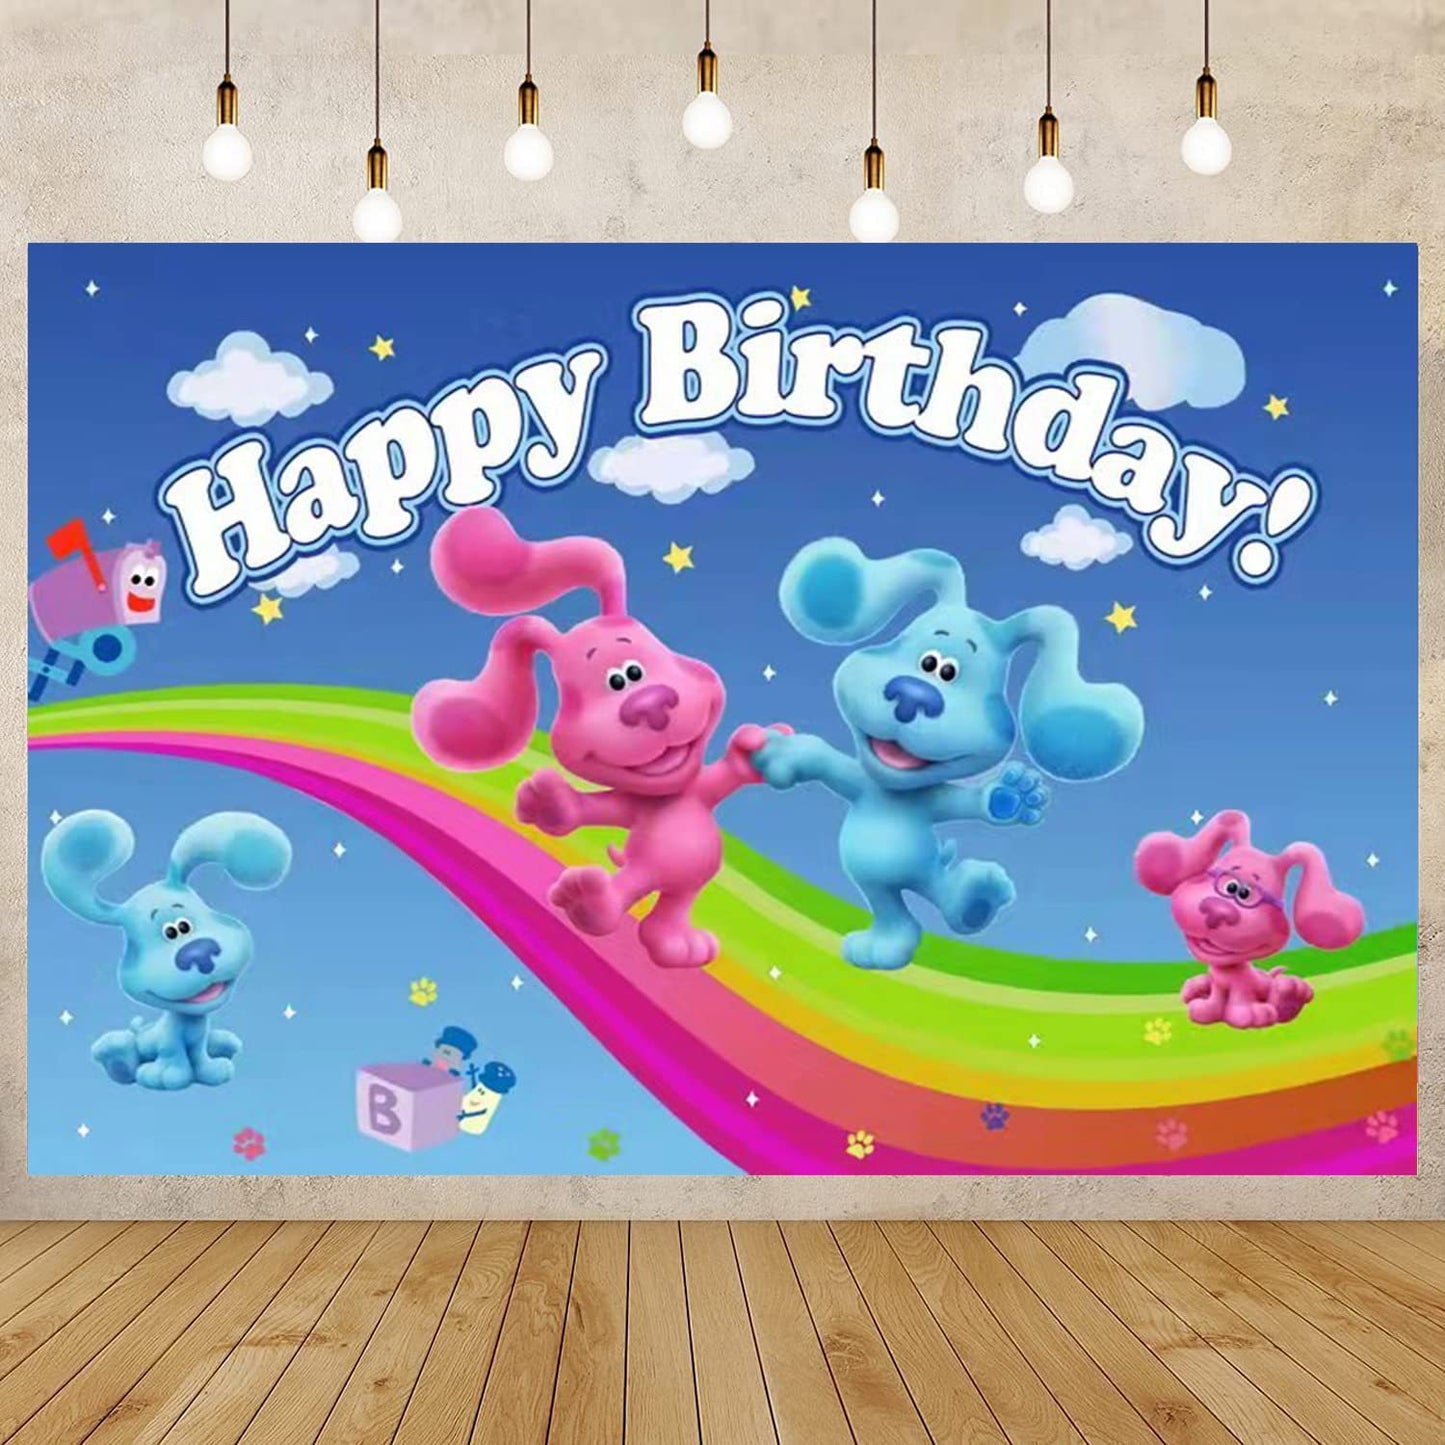 Blue Clues Birthday Party Decorations